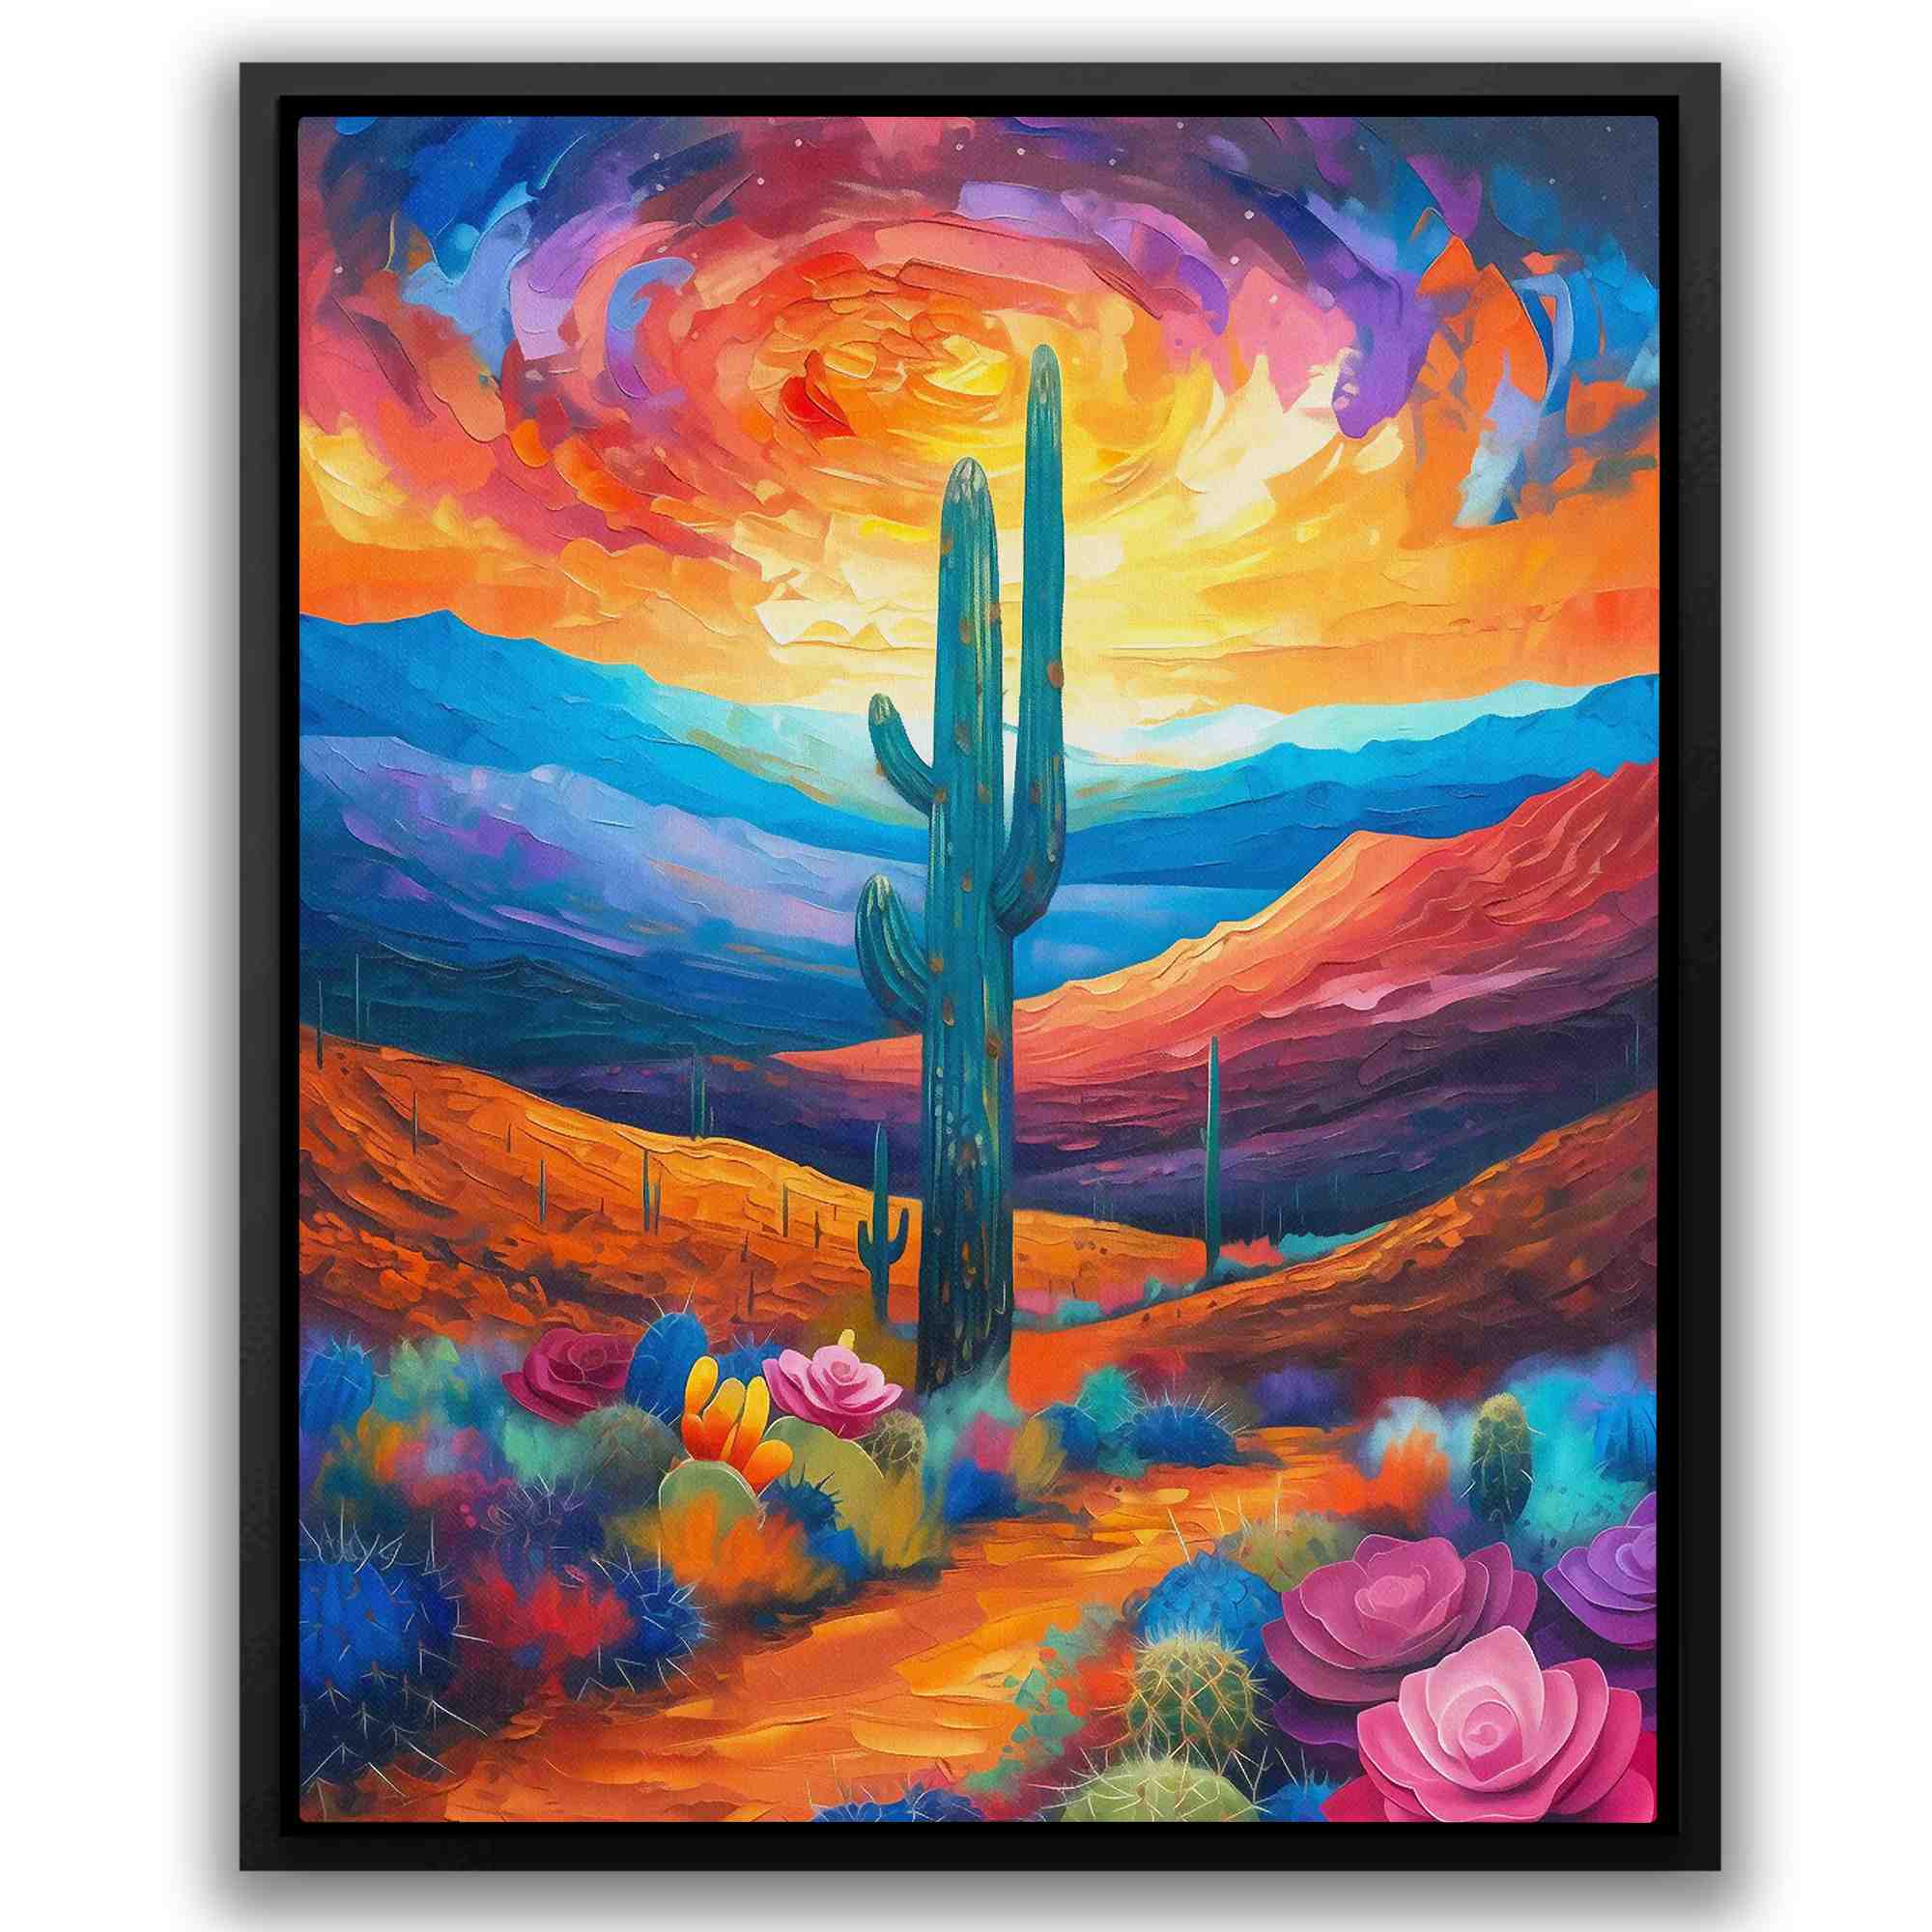 a painting of a desert scene with a cactus in the foreground